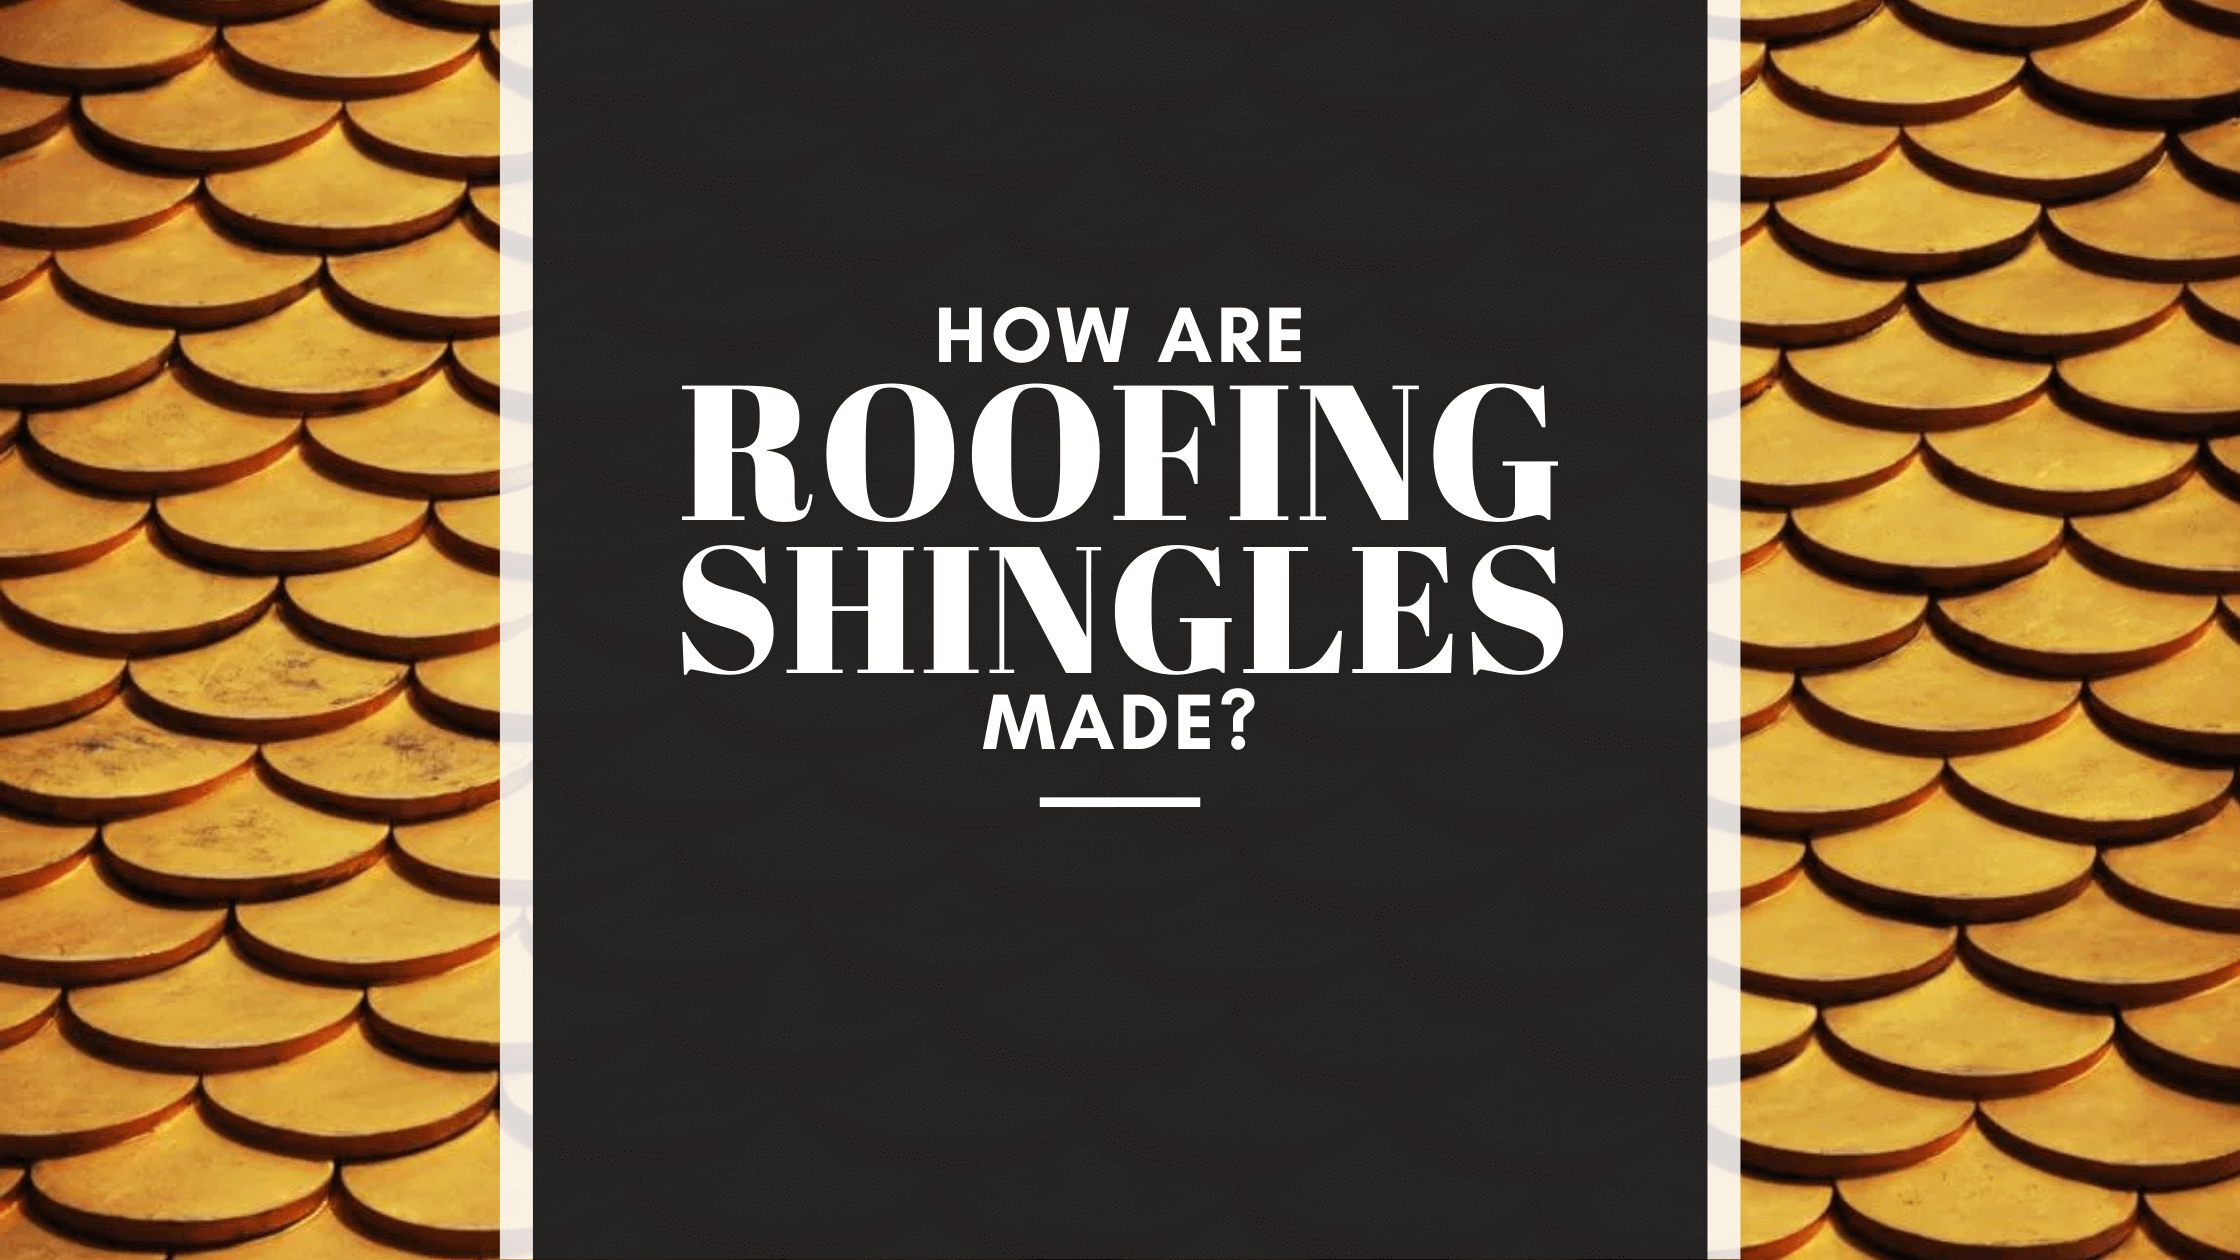 How are roofing shingles made